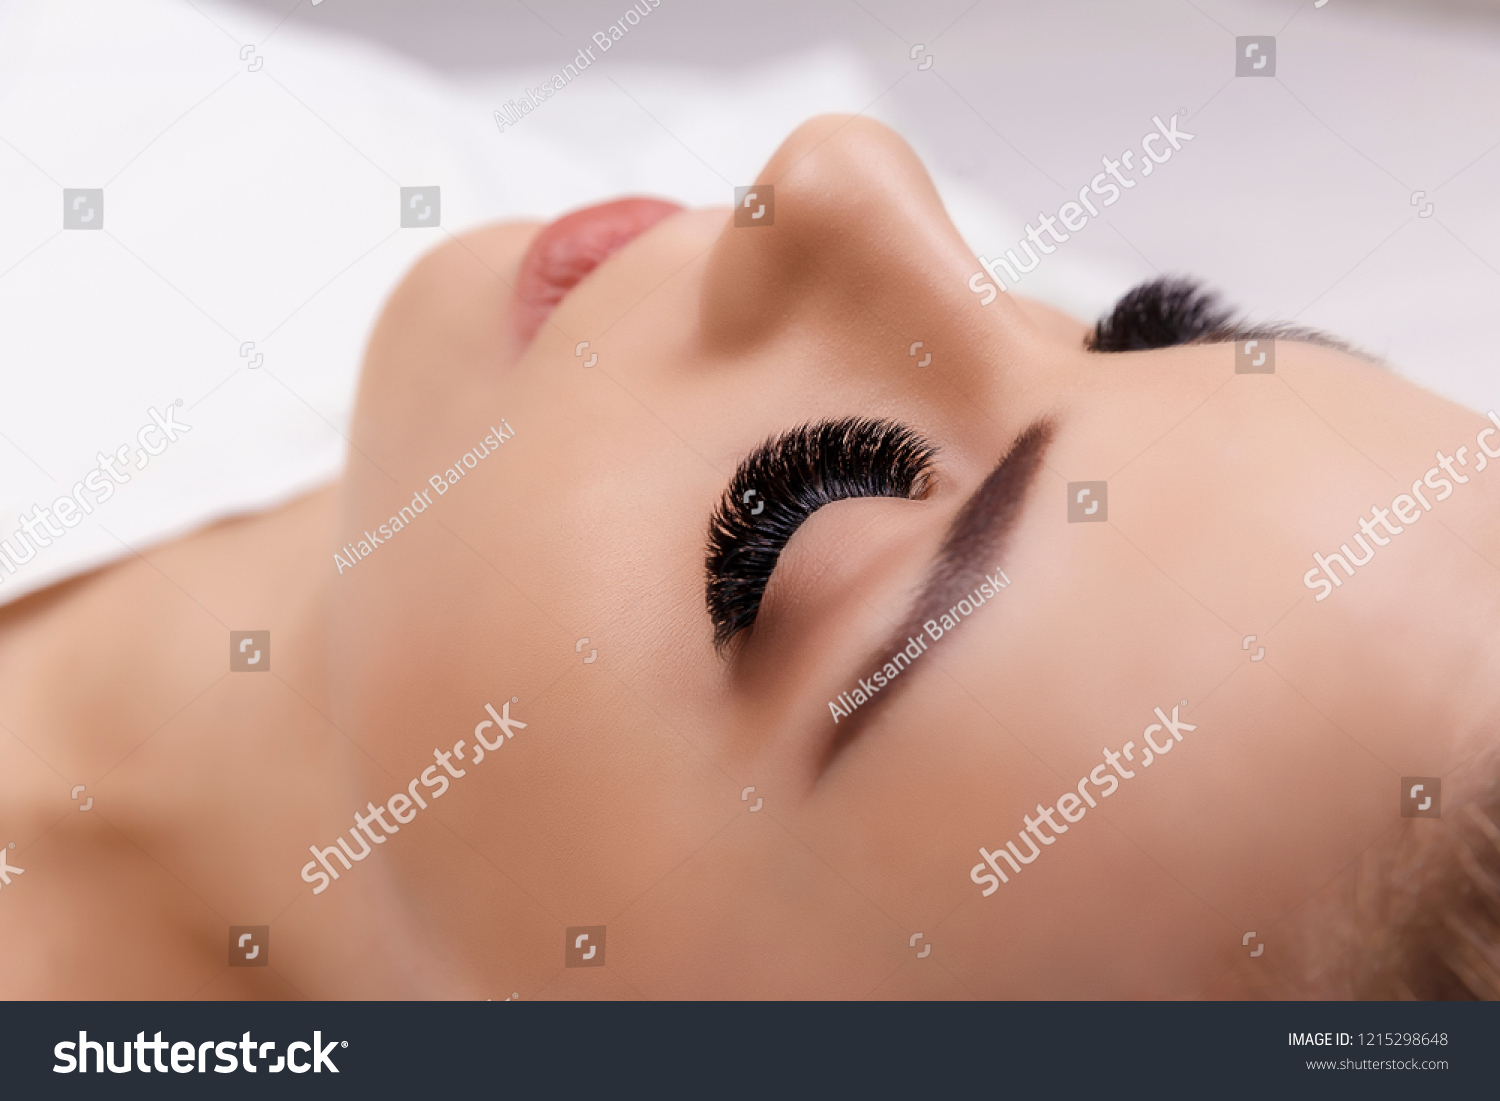 Eyelash Extension Procedure. Woman Eye with Long Eyelashes. Close up, selective focus. Hollywood, russian volume #1215298648